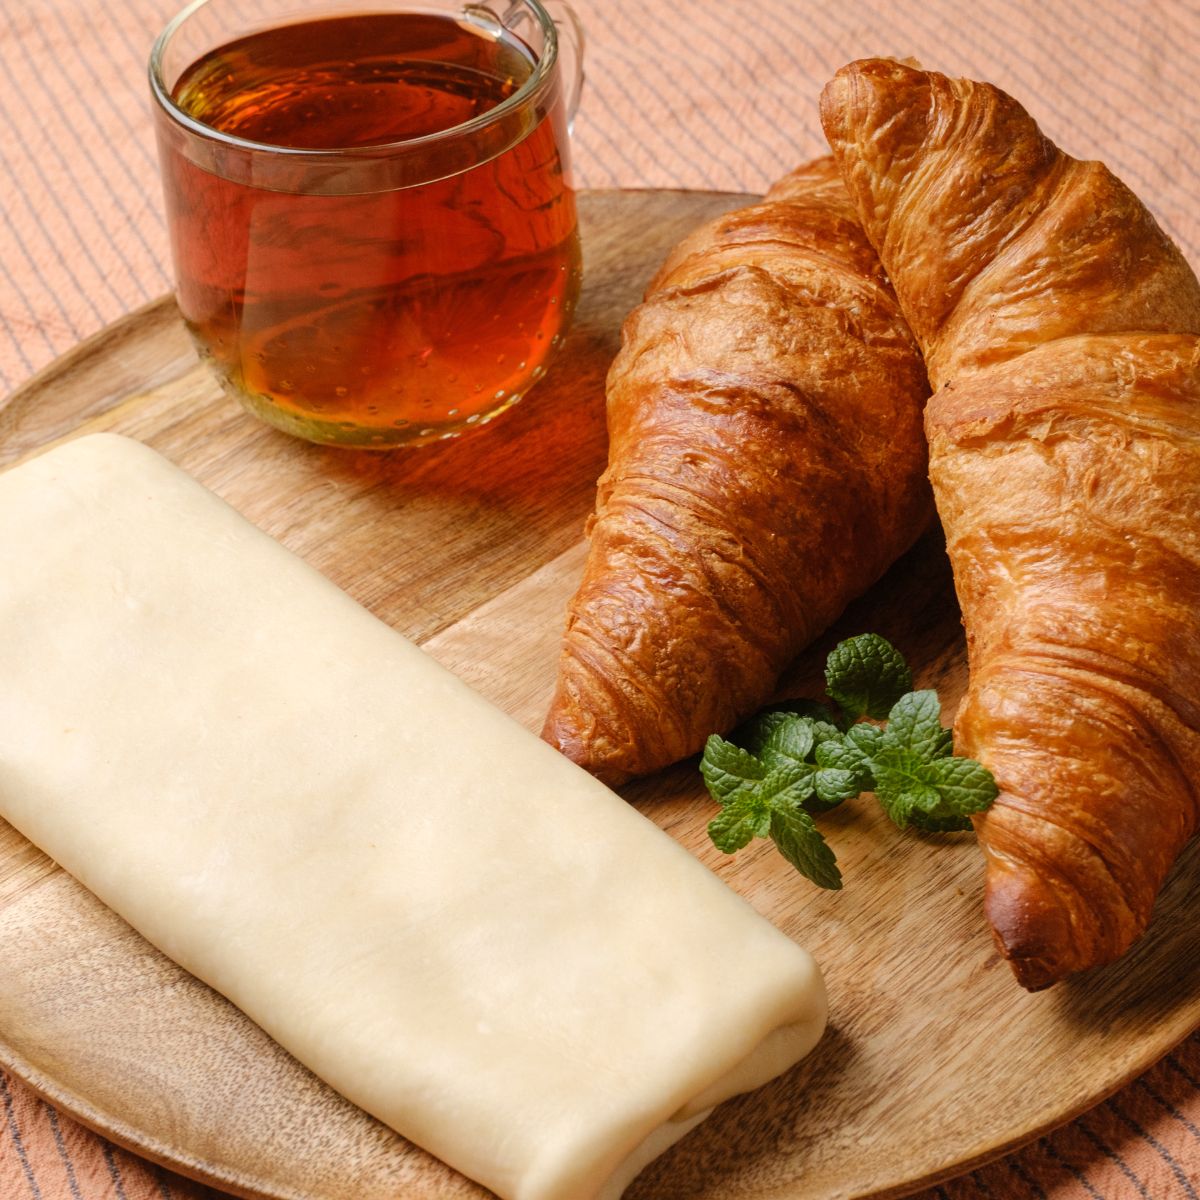 Vegan puff pastry sheet served with cup of tea and croissants.
